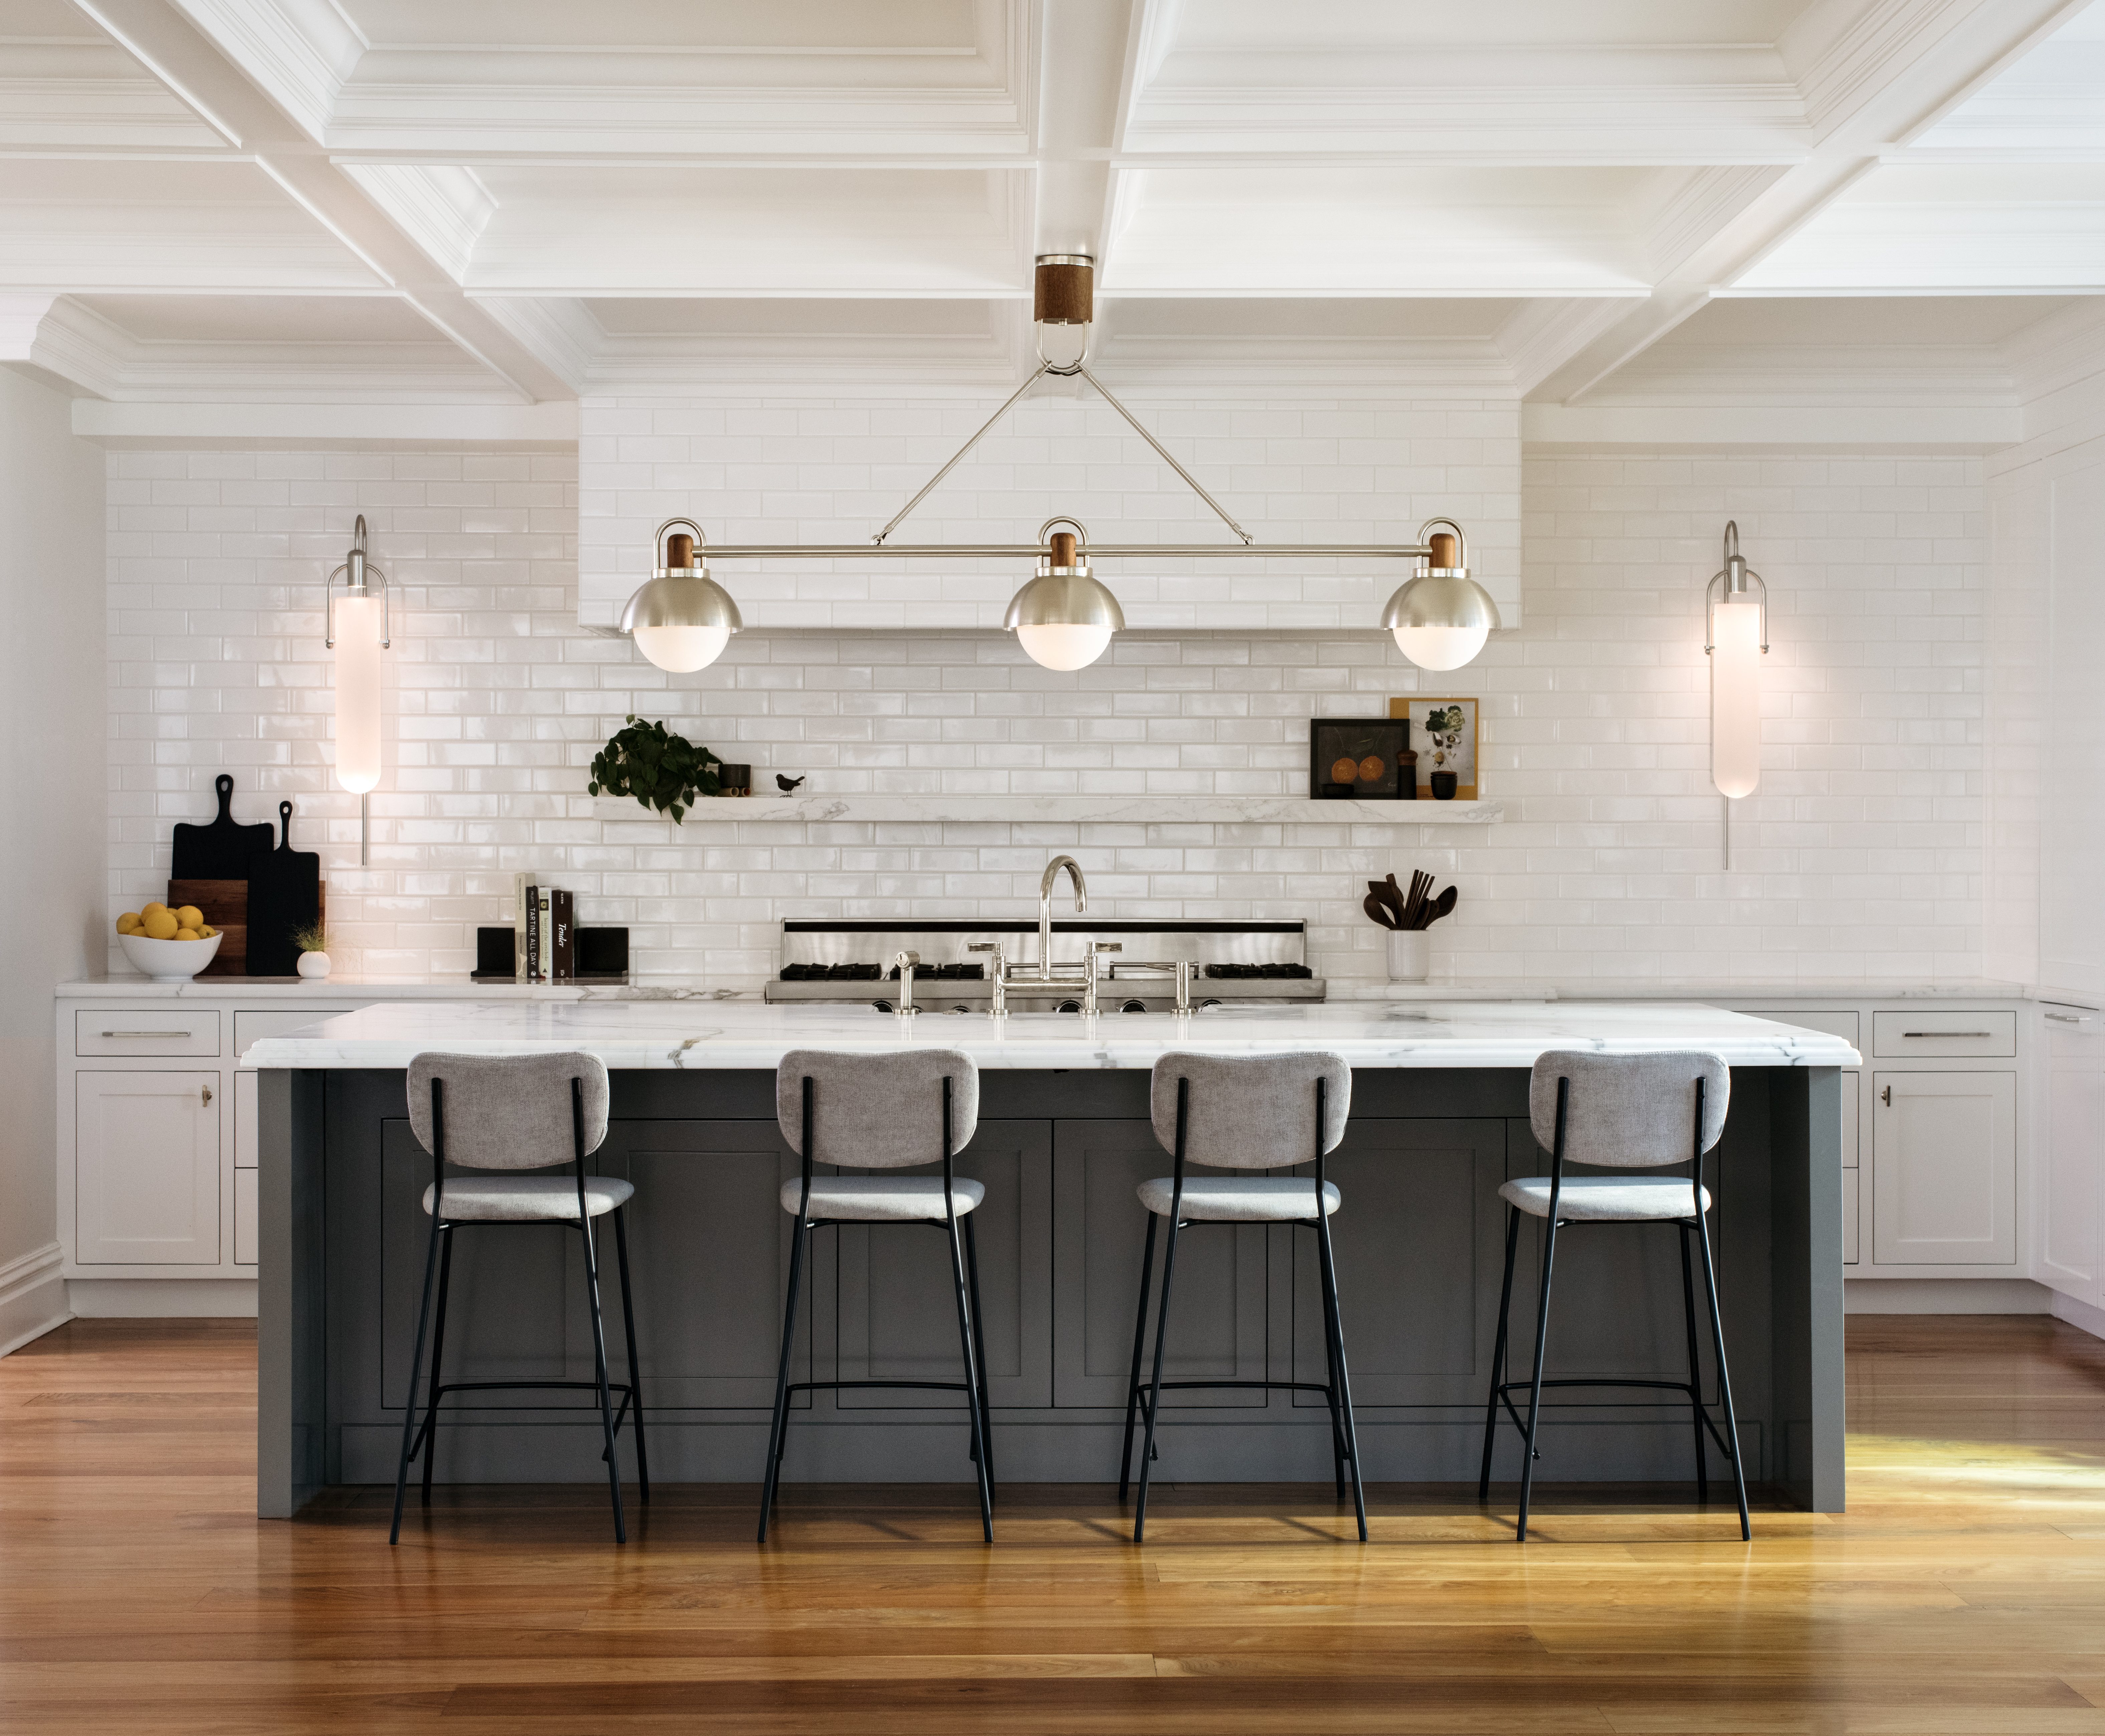 A picture of a newly renovated kitchen with modern industrial chic lighting and stools at a tall counter.